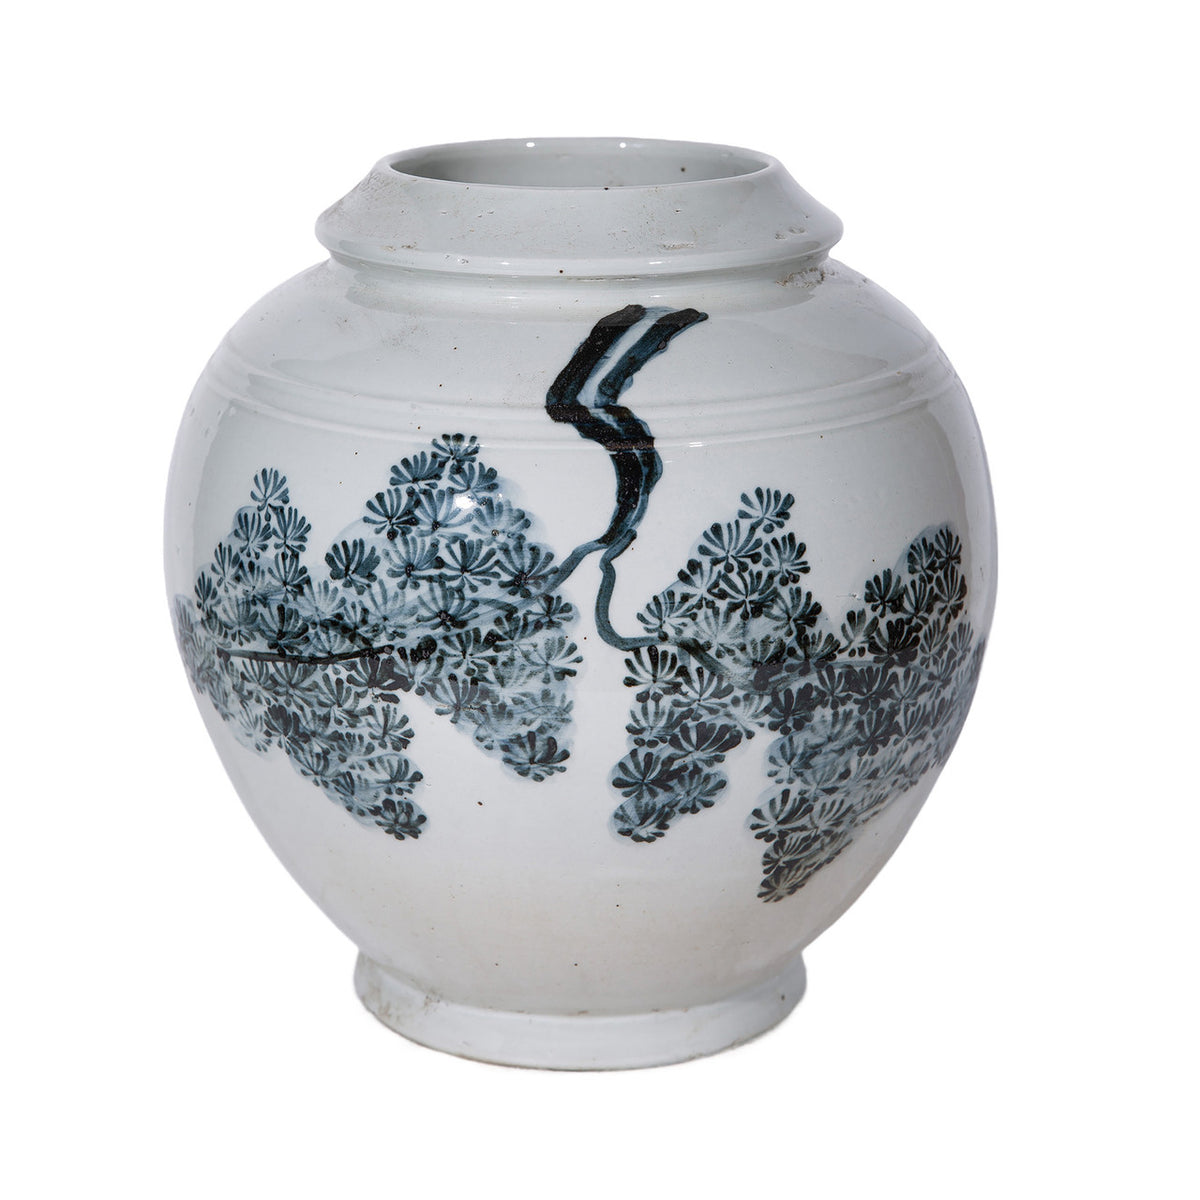 Legend of Asia chinoiserie vase